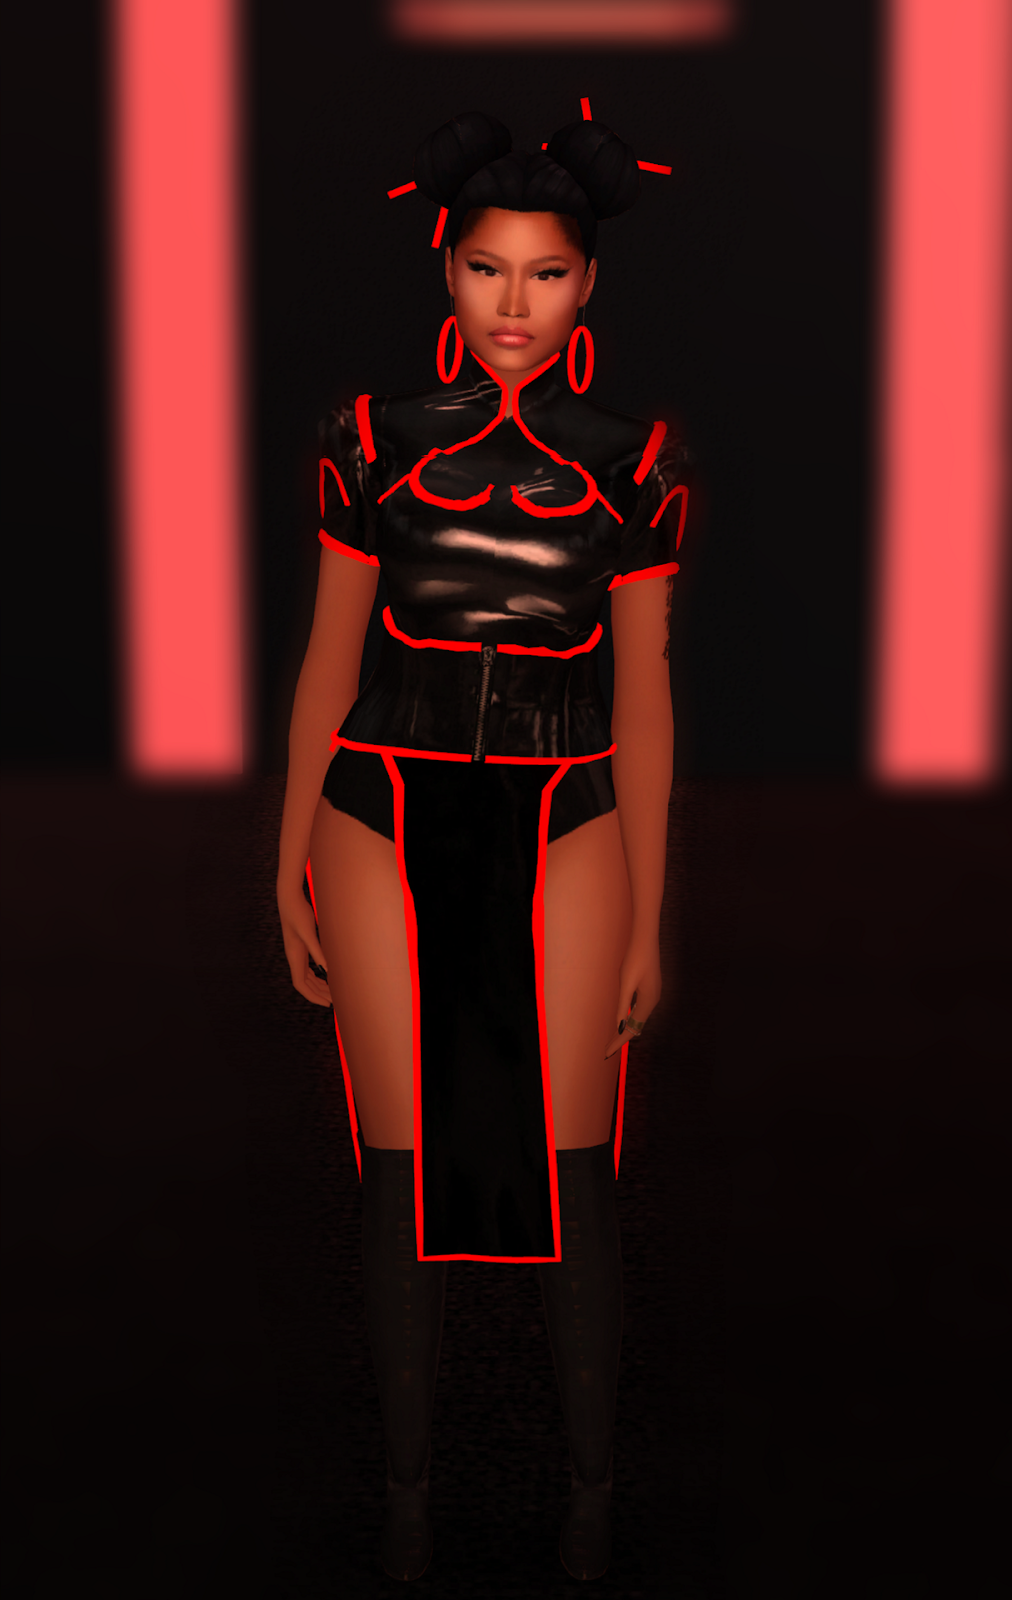 The Black Simmer Chun Li Neon Outfit And King Kong Hair By Que2n